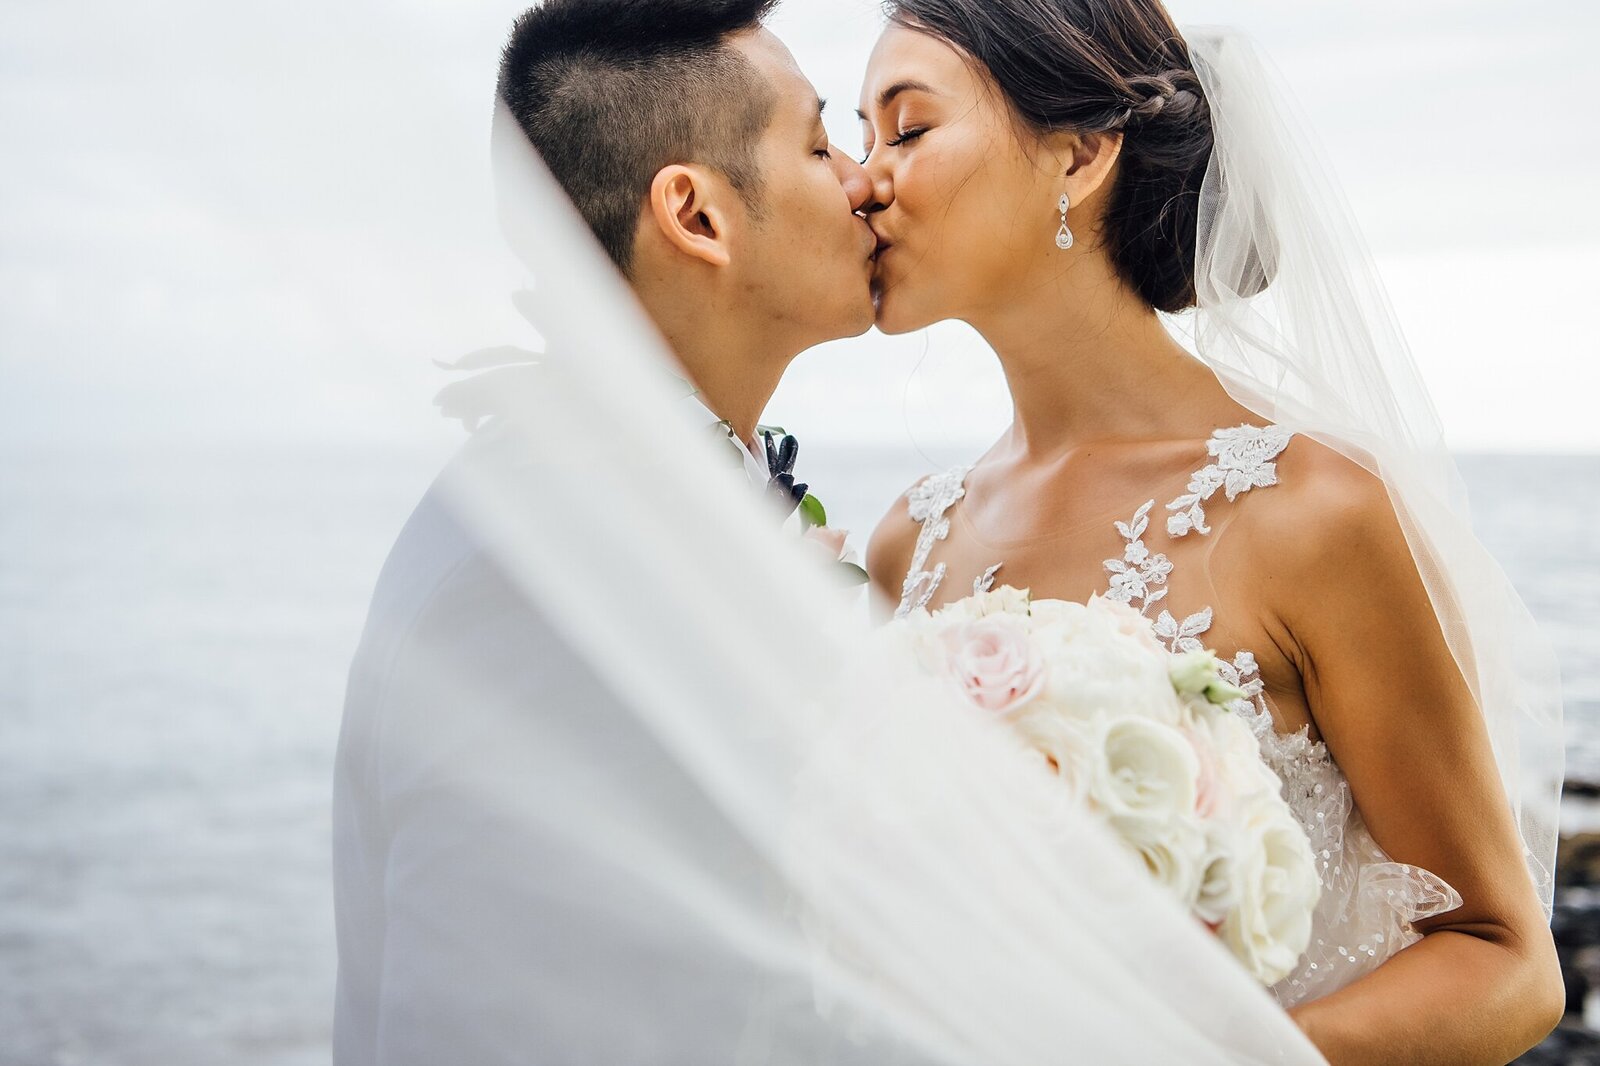 couple kissing during their wedding day at the beach